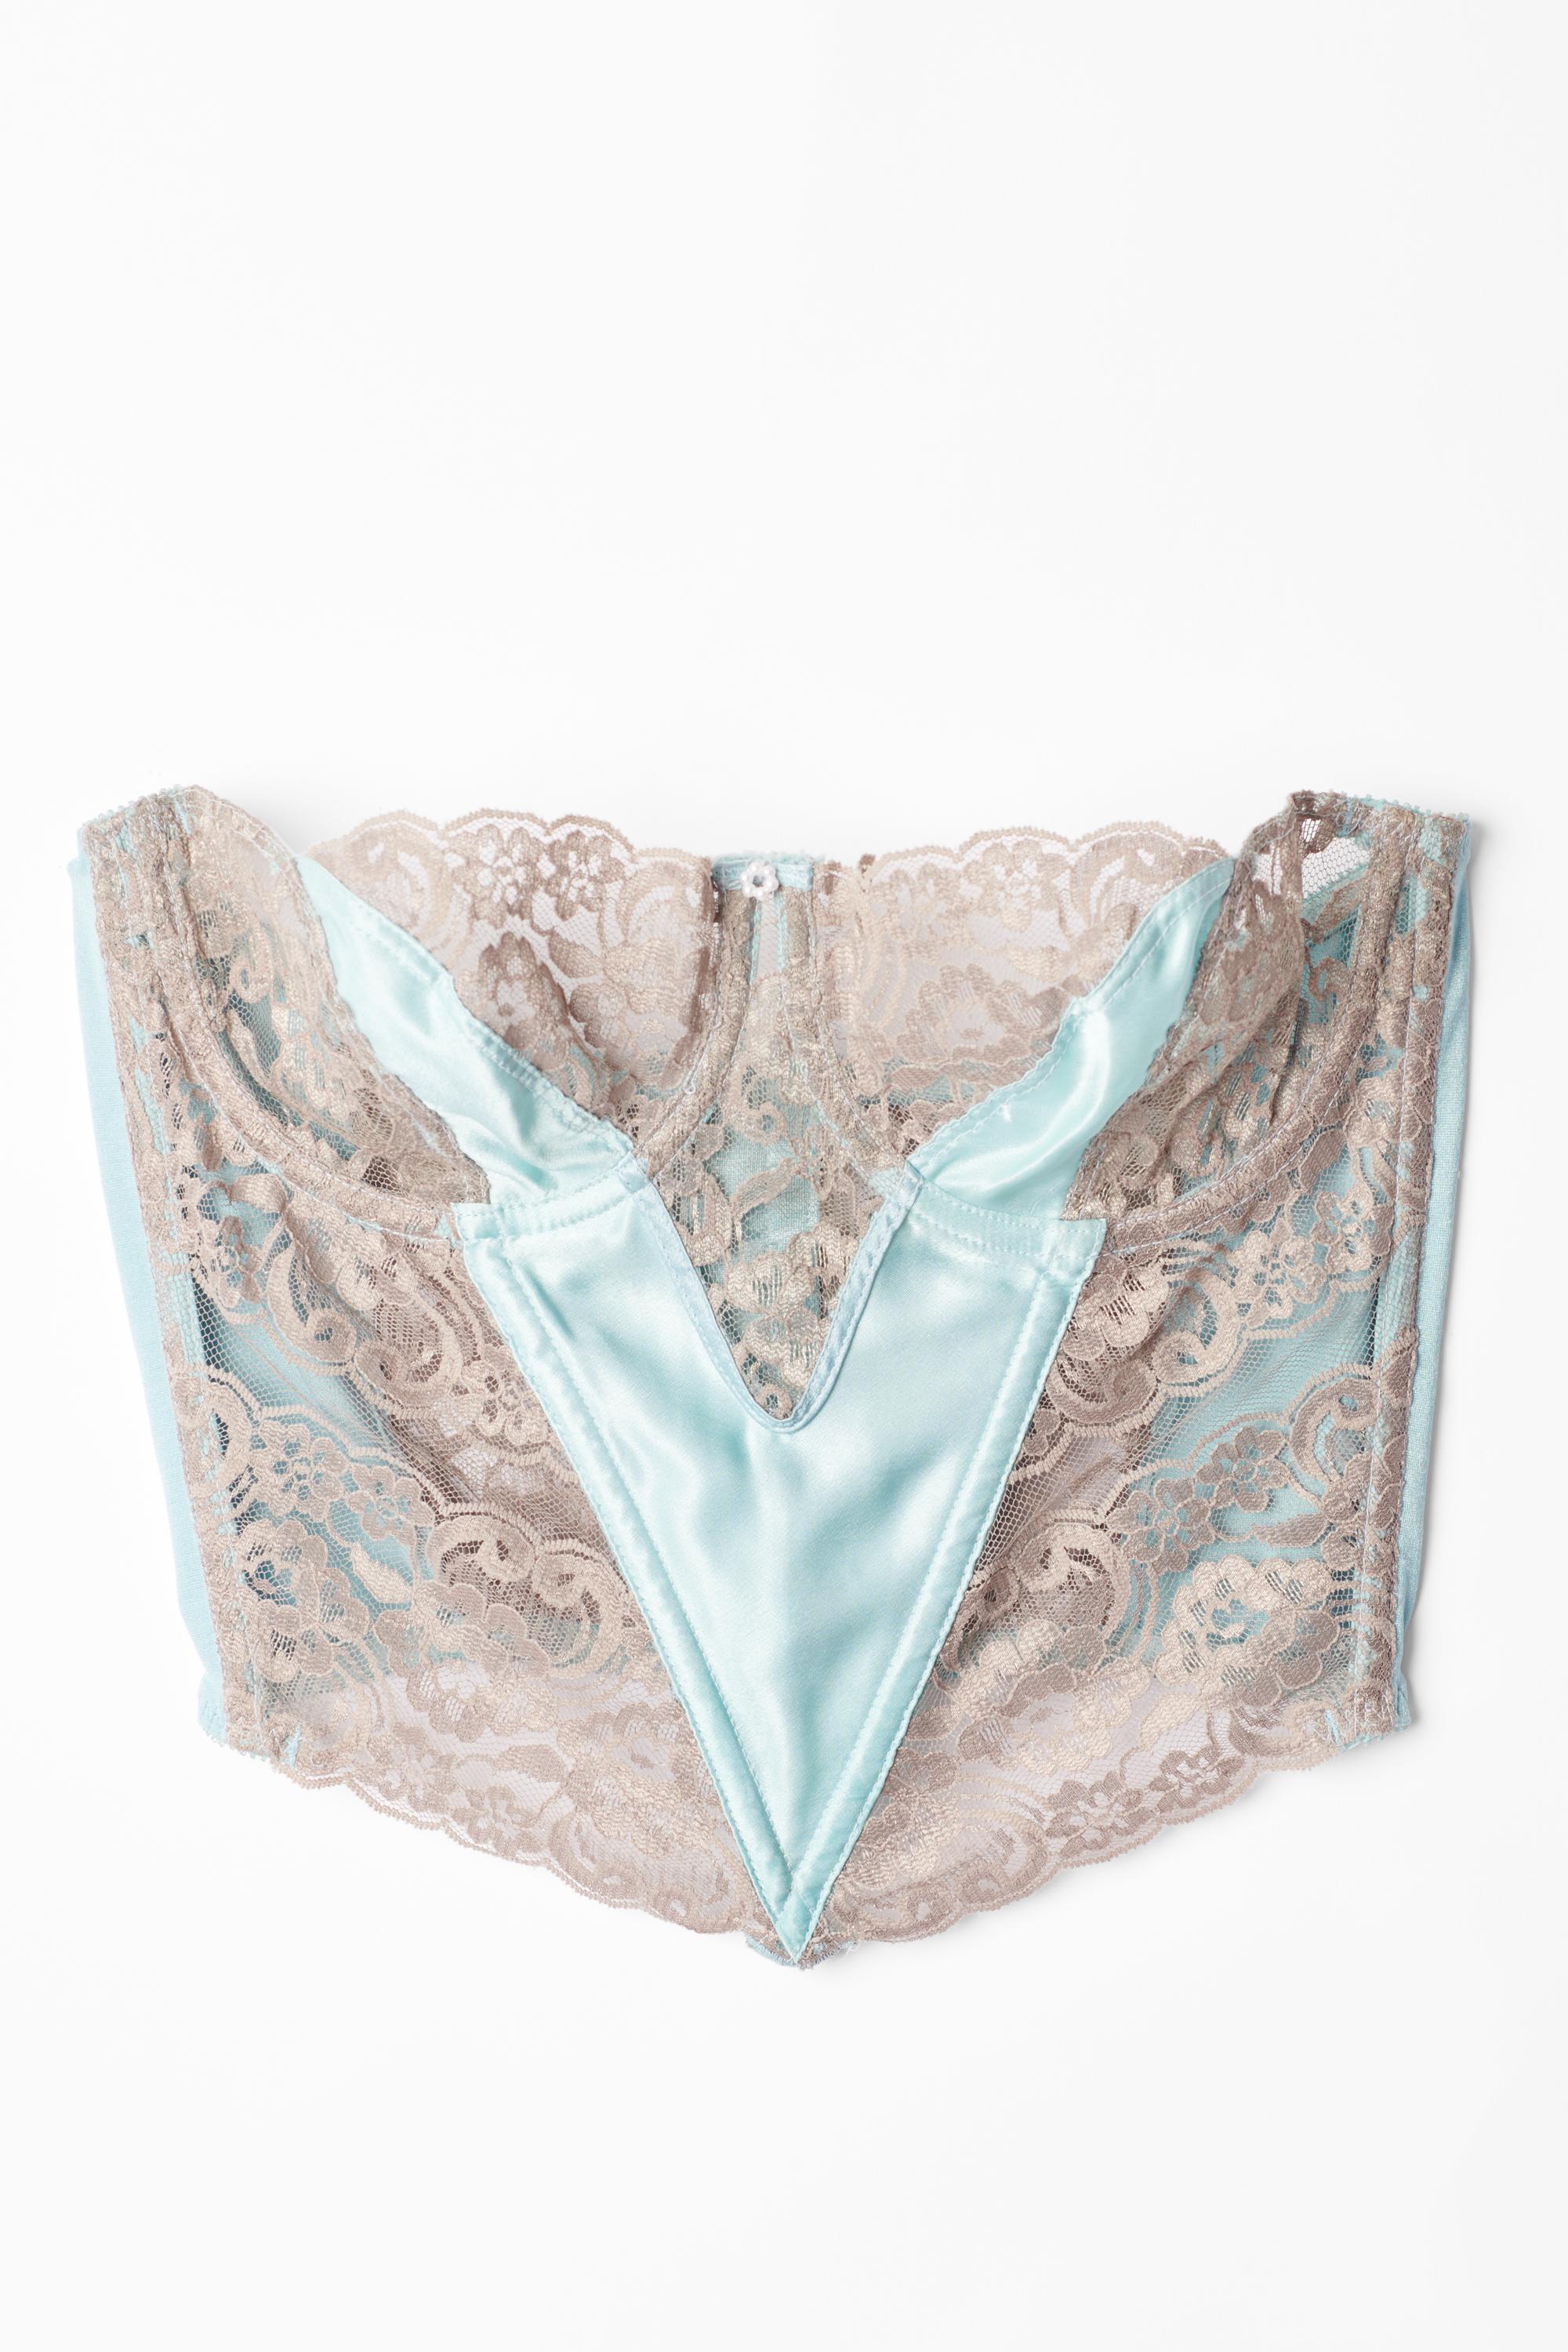 Vintage Christian Dior lace taupe and blue satin corset. Features satin and lace panelling allover, with blue satin and taupe lace, semi-sheer cups and pearl centre and corset back closure. In excellent vintage condition.
Authenticity